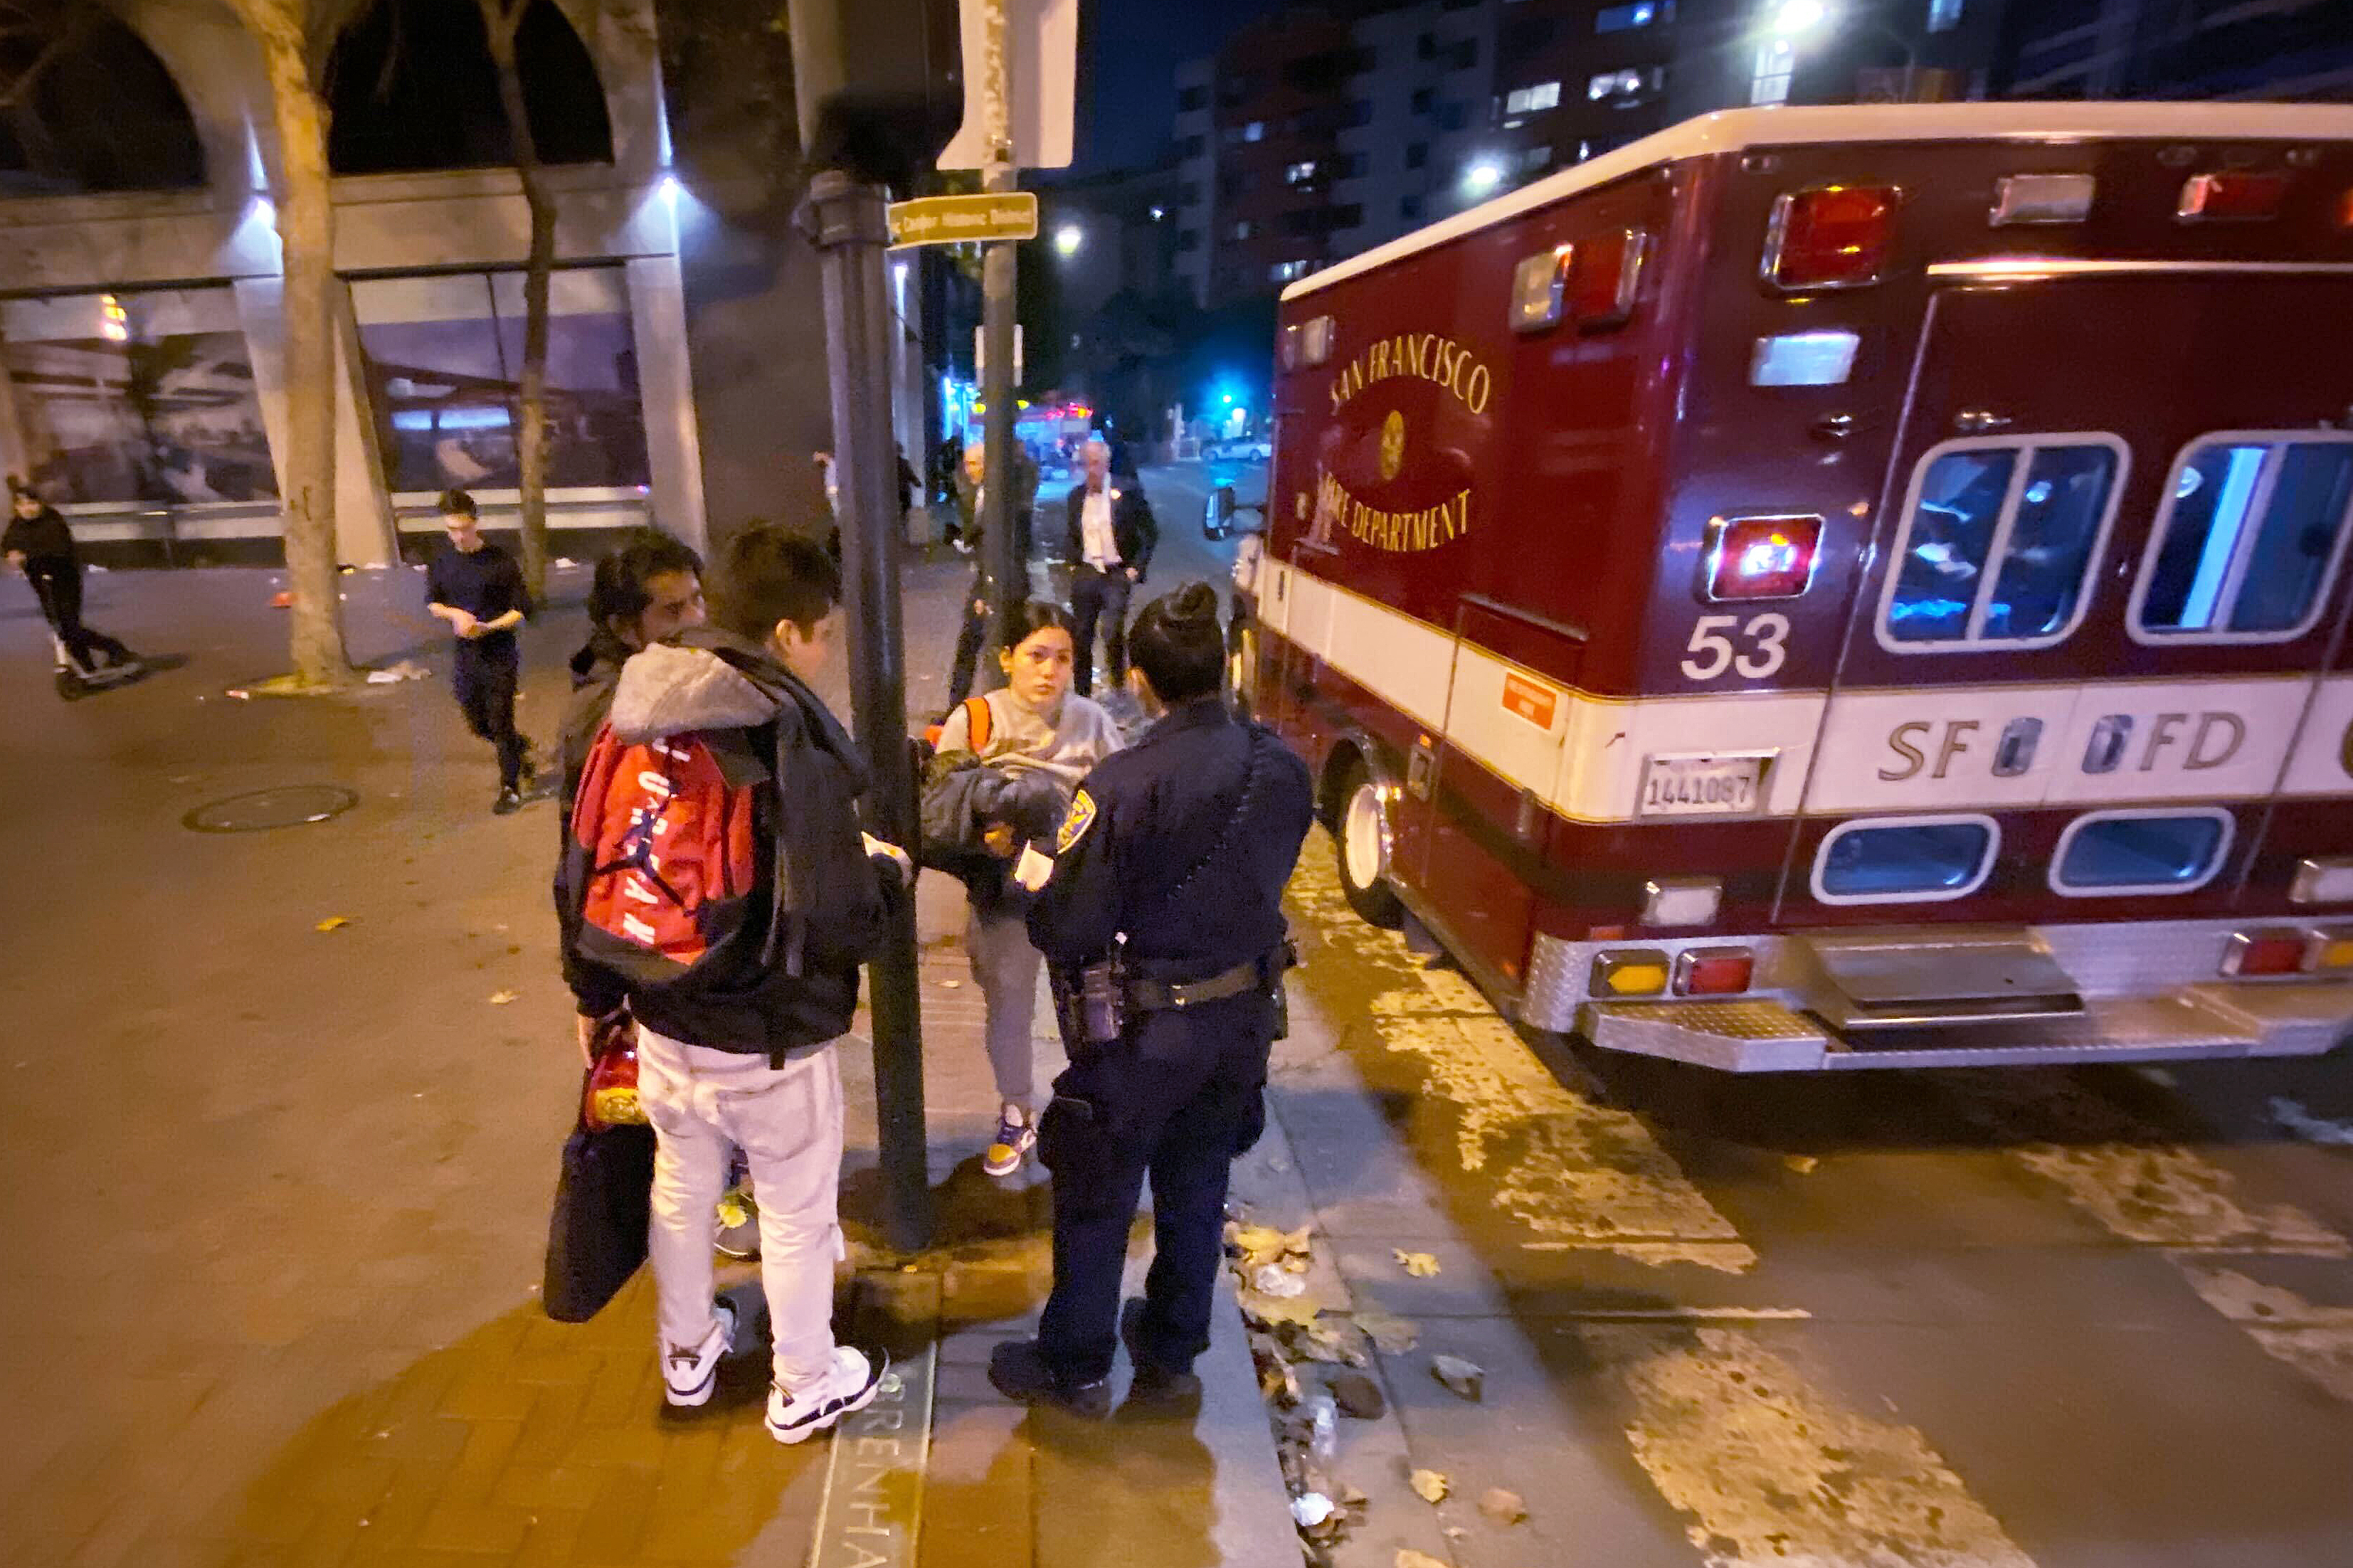 An ambulance is parked on a city street at night, with a police officer talking to two people next to it.